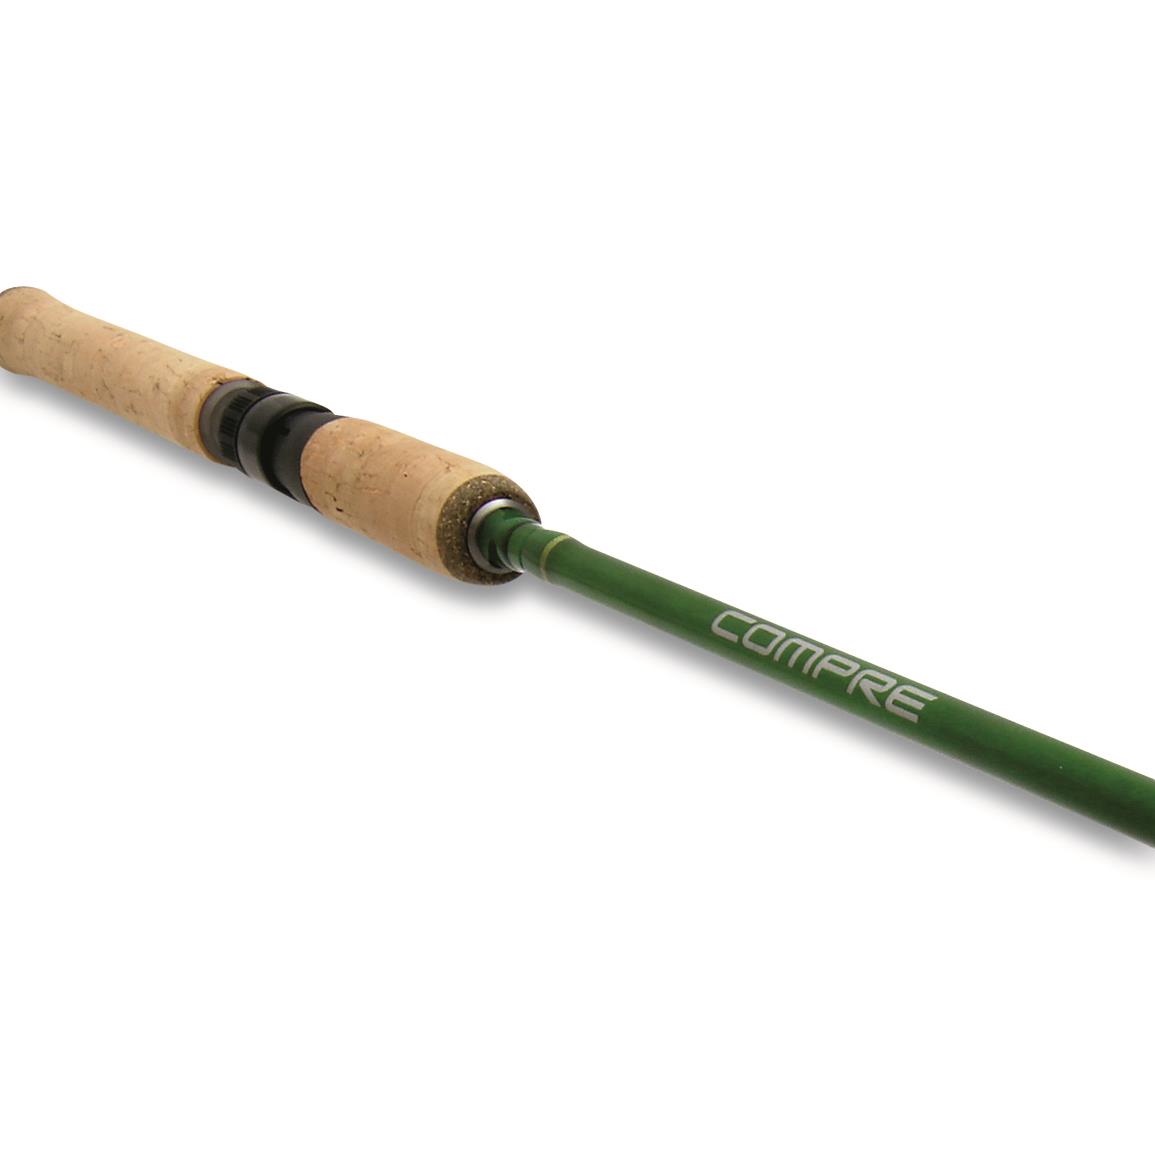 Shimano Compre Walleye Spinning Rod, 7' Length, Medium Power, Extra Fast Action